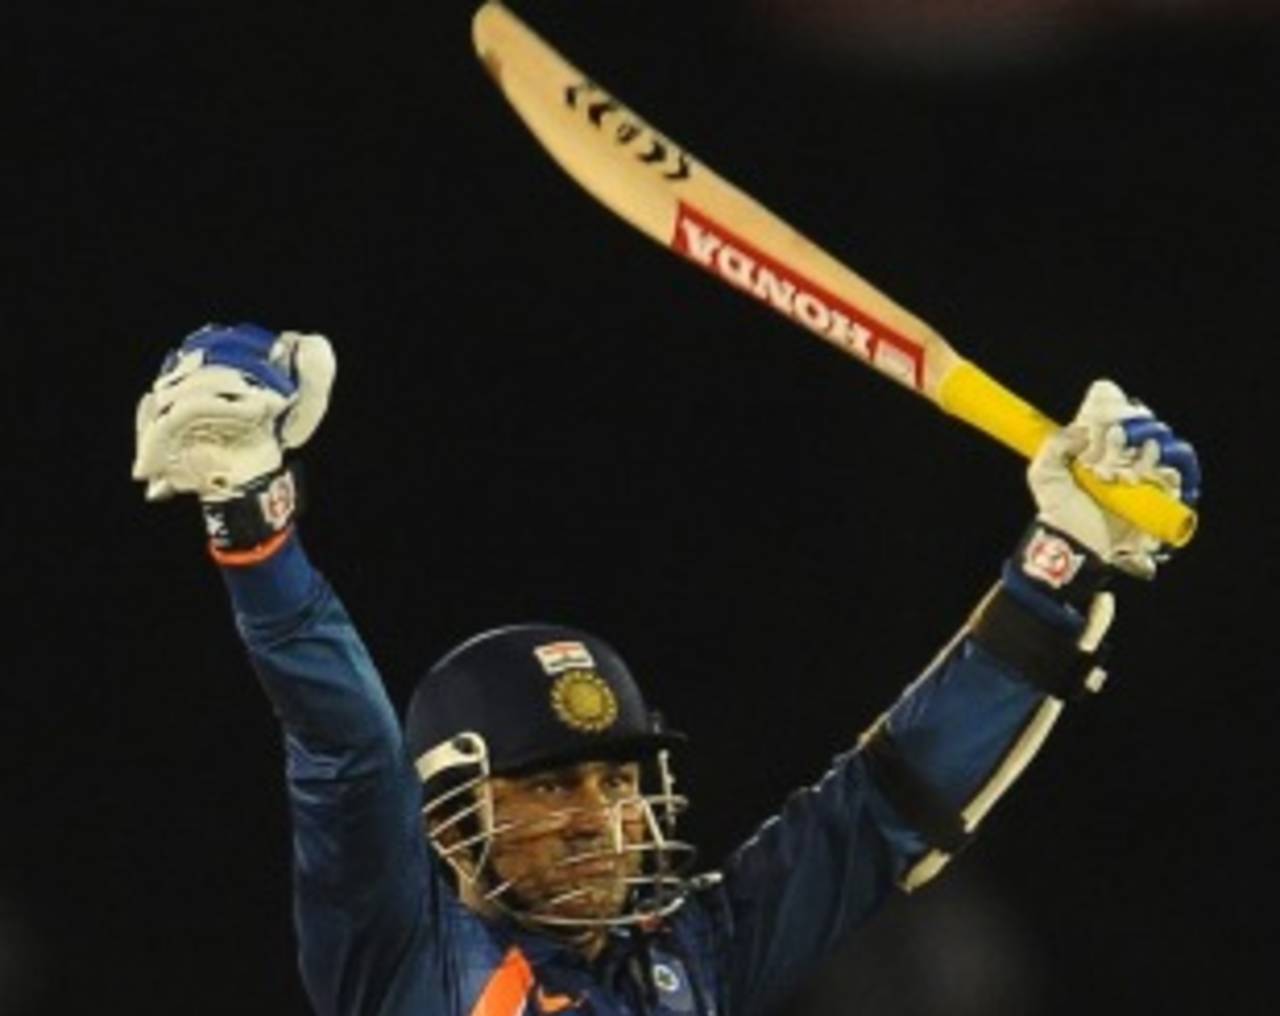 Virender Sehwag raises his arms after the victory, Sri Lanka v India, tri-series, 3rd ODI, Dambulla, August 16, 2010